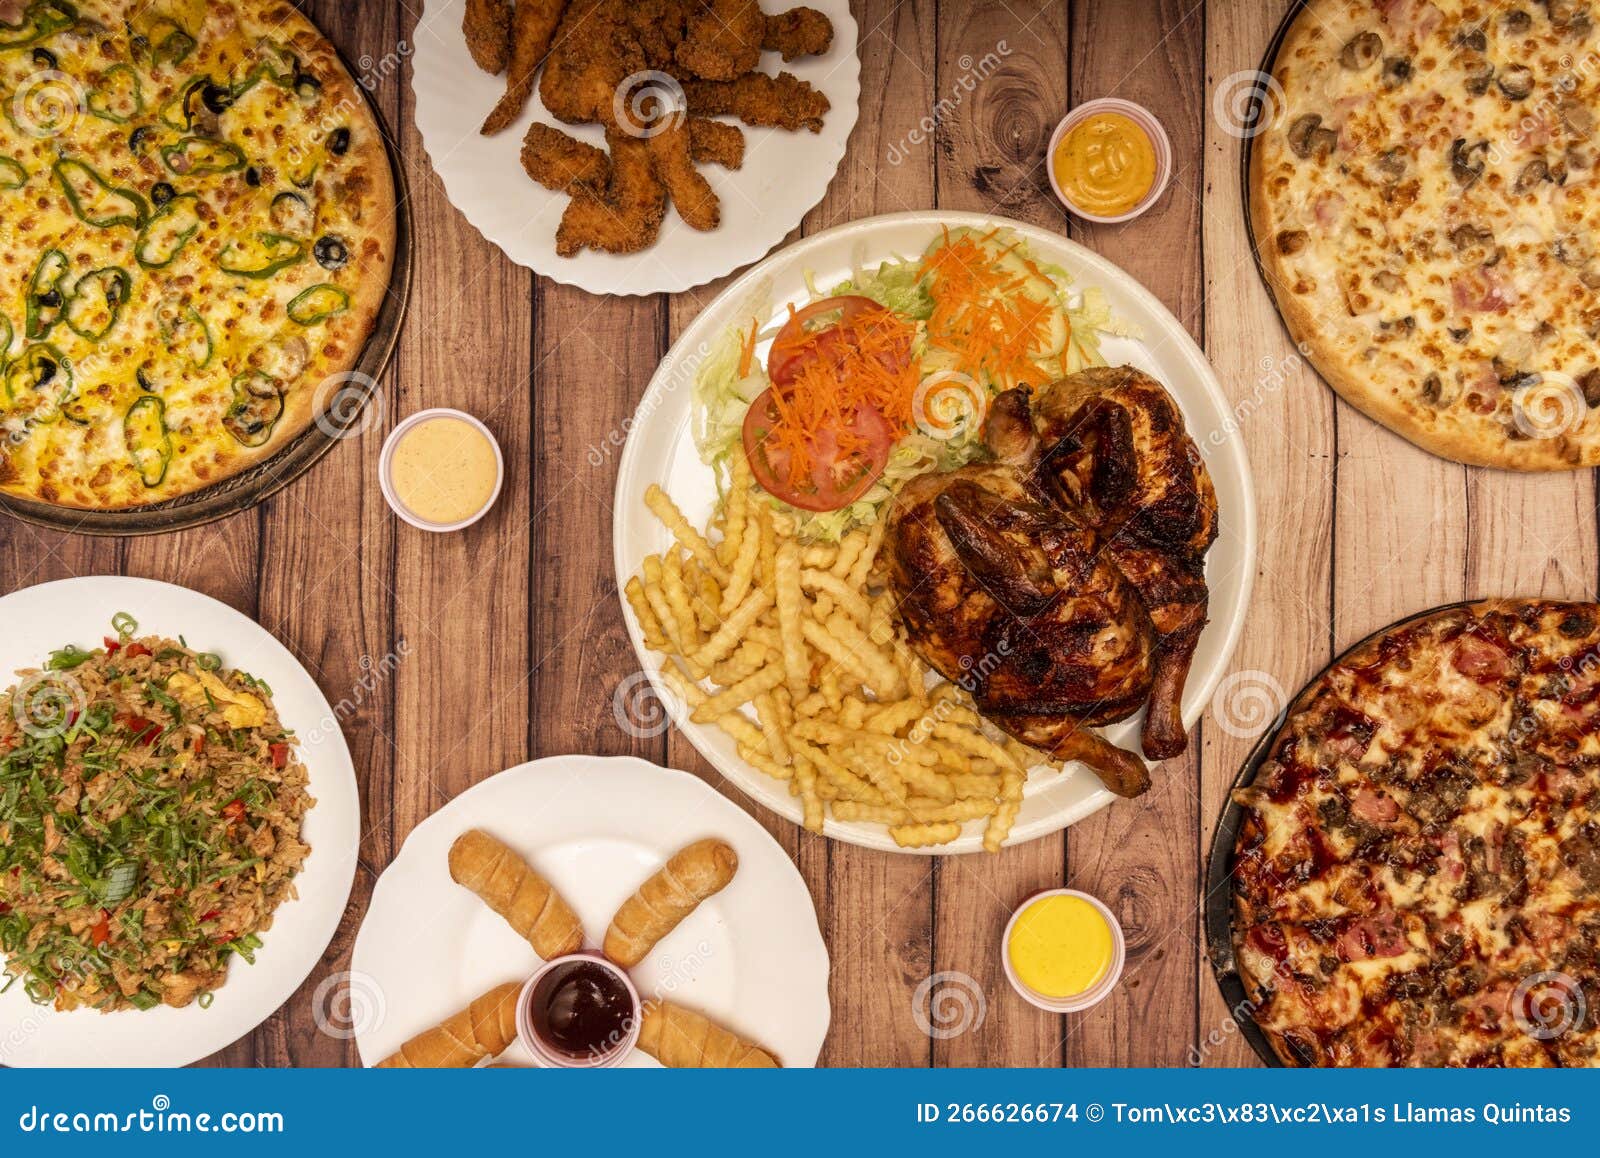 set of varied fast food dishes, various pizzas, carbon-roasted chicken with fries and salad, fried rice, teques and fried chicken